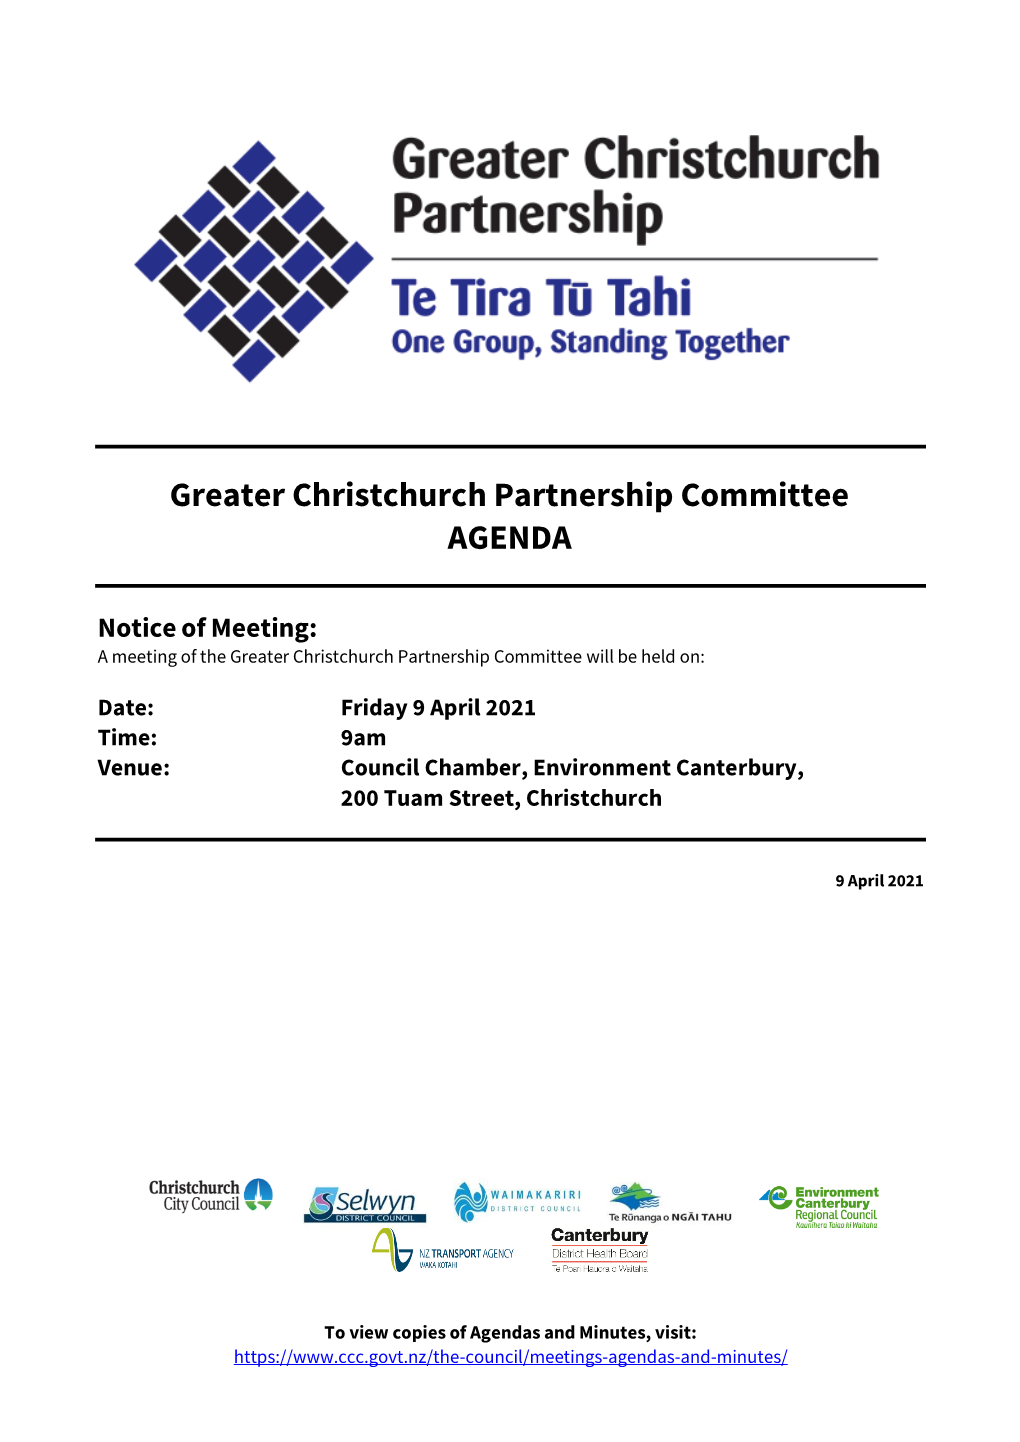 Agenda of Greater Christchurch Partnership Committee